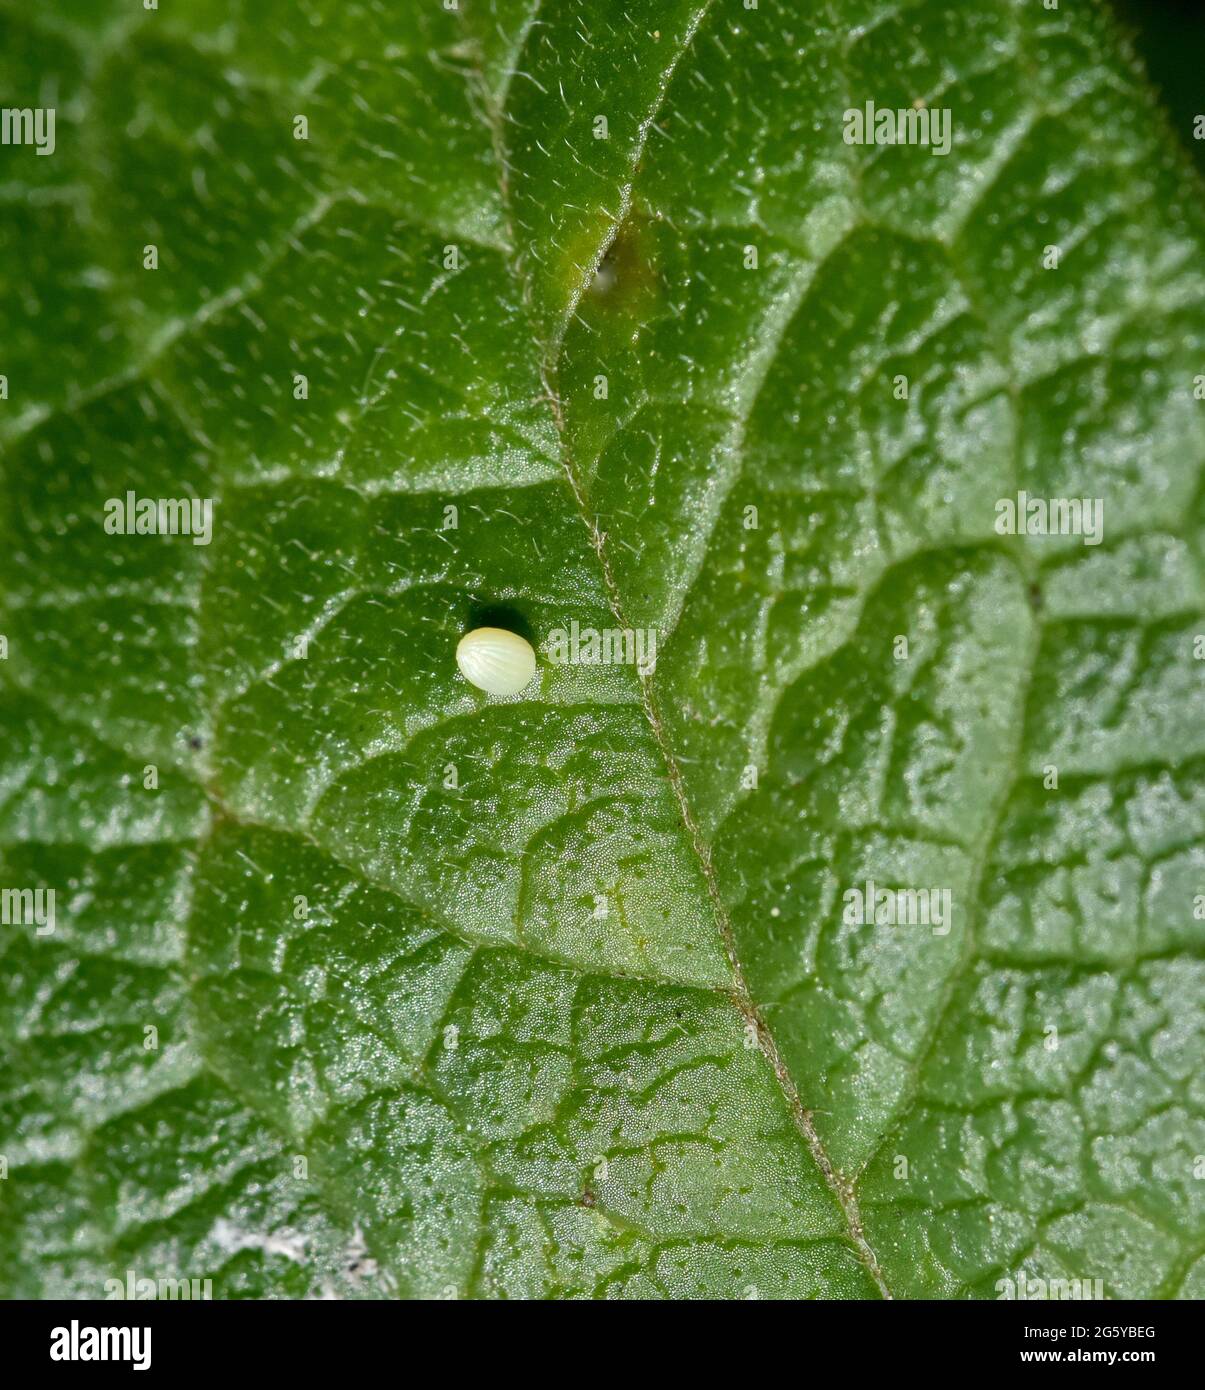 A Monarch butterfly (Danaus plexippus) egg attached to the surface of a milkweed leaf (Asclepias tuberosa).  Top view. Closeup. Copy space. Stock Photo